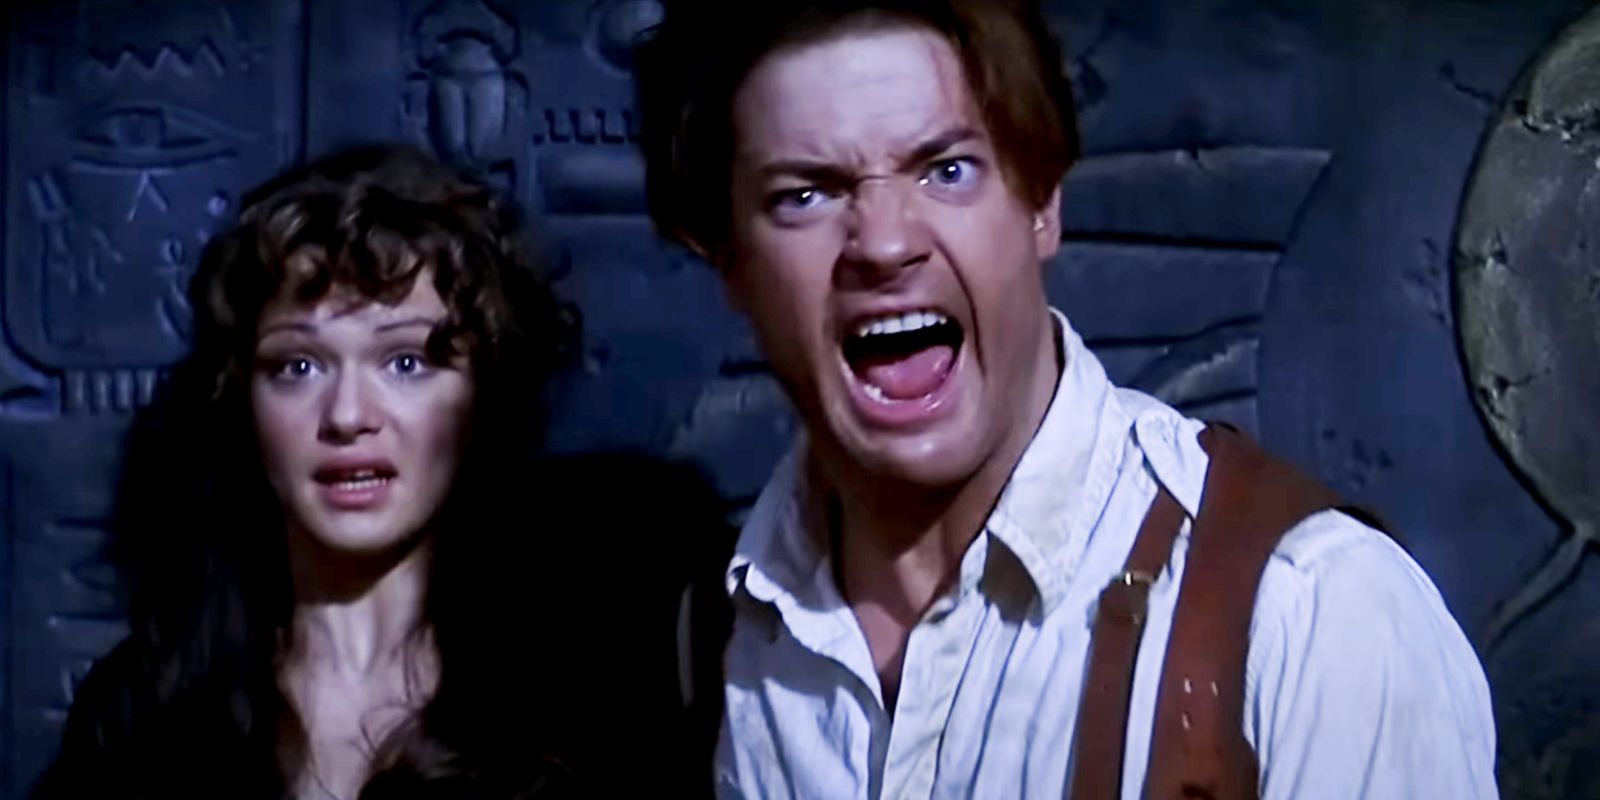 Evelyn and Rick screaming in ruins in The Mummy (1999)